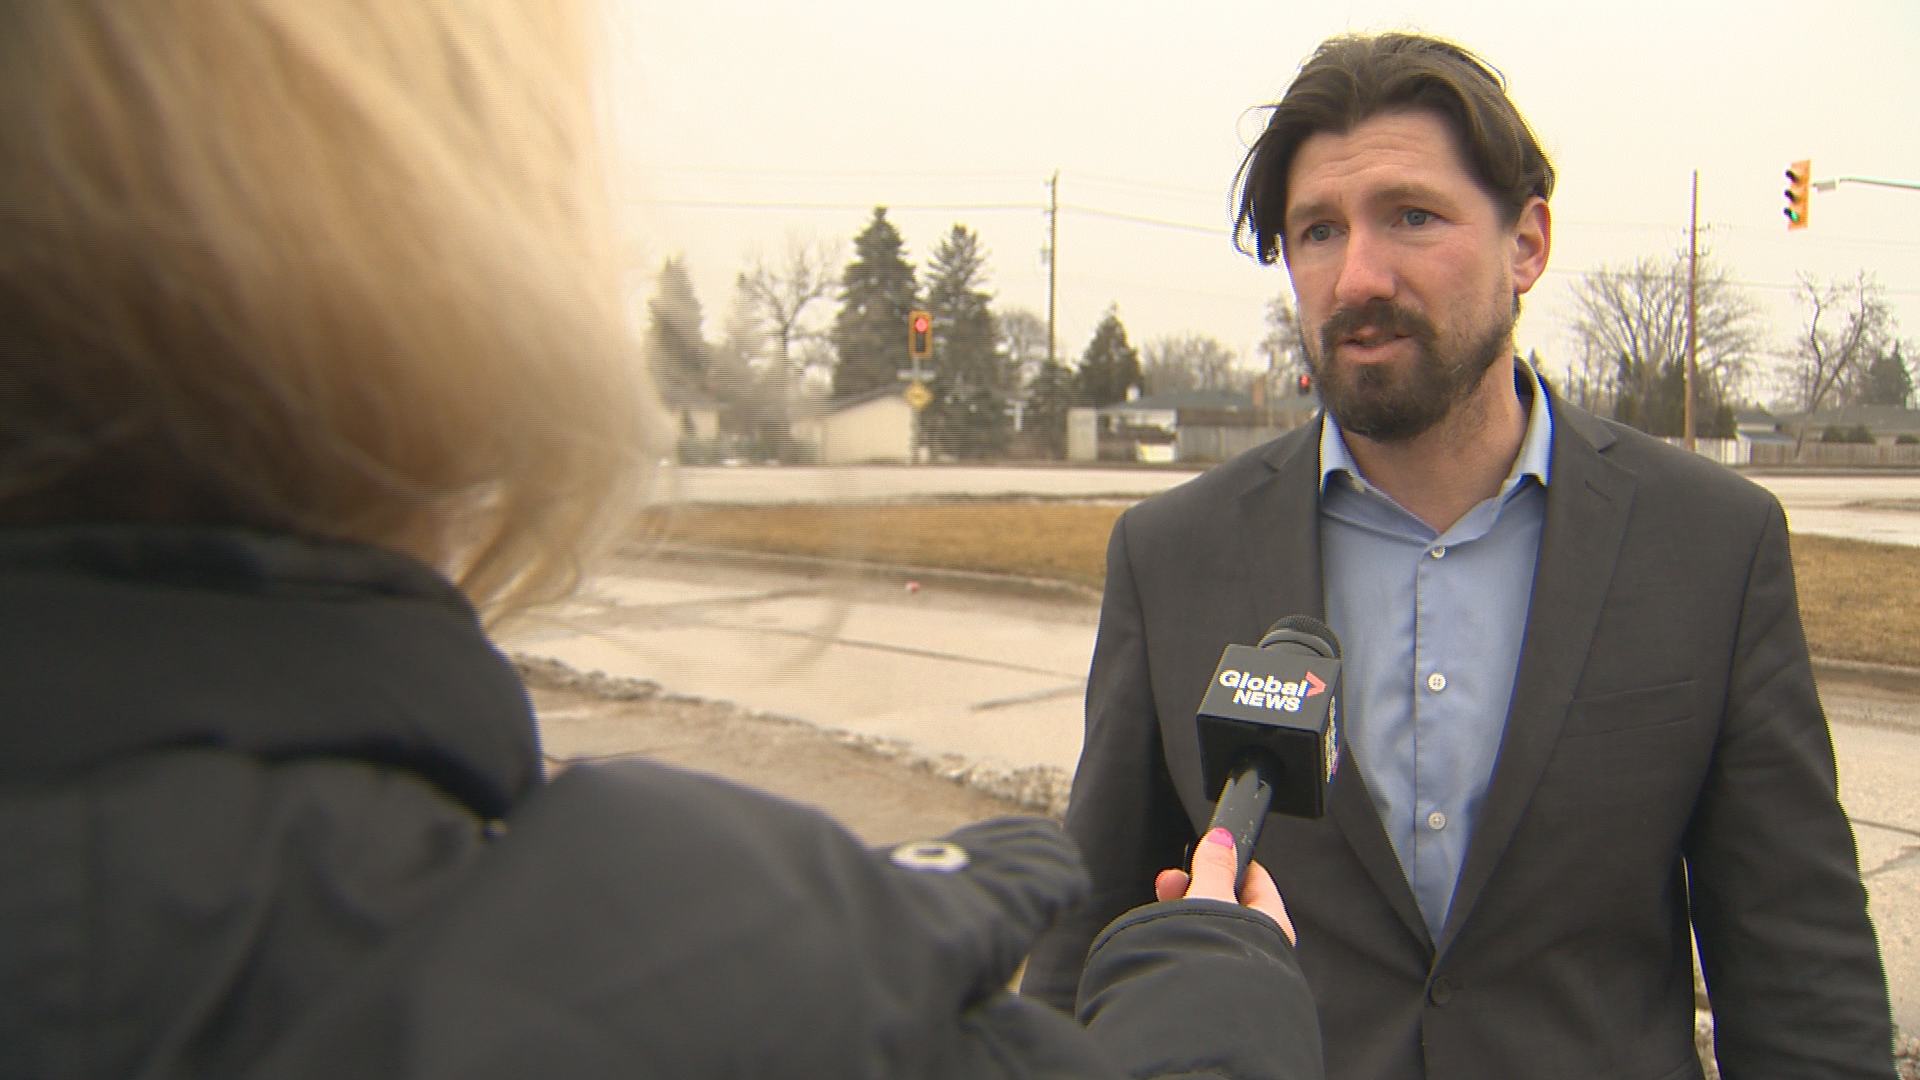 Winnipeg city Coun. Matt Allard faced another rejection for a motion to clear icy sidewalks across the city on Jan. 30.